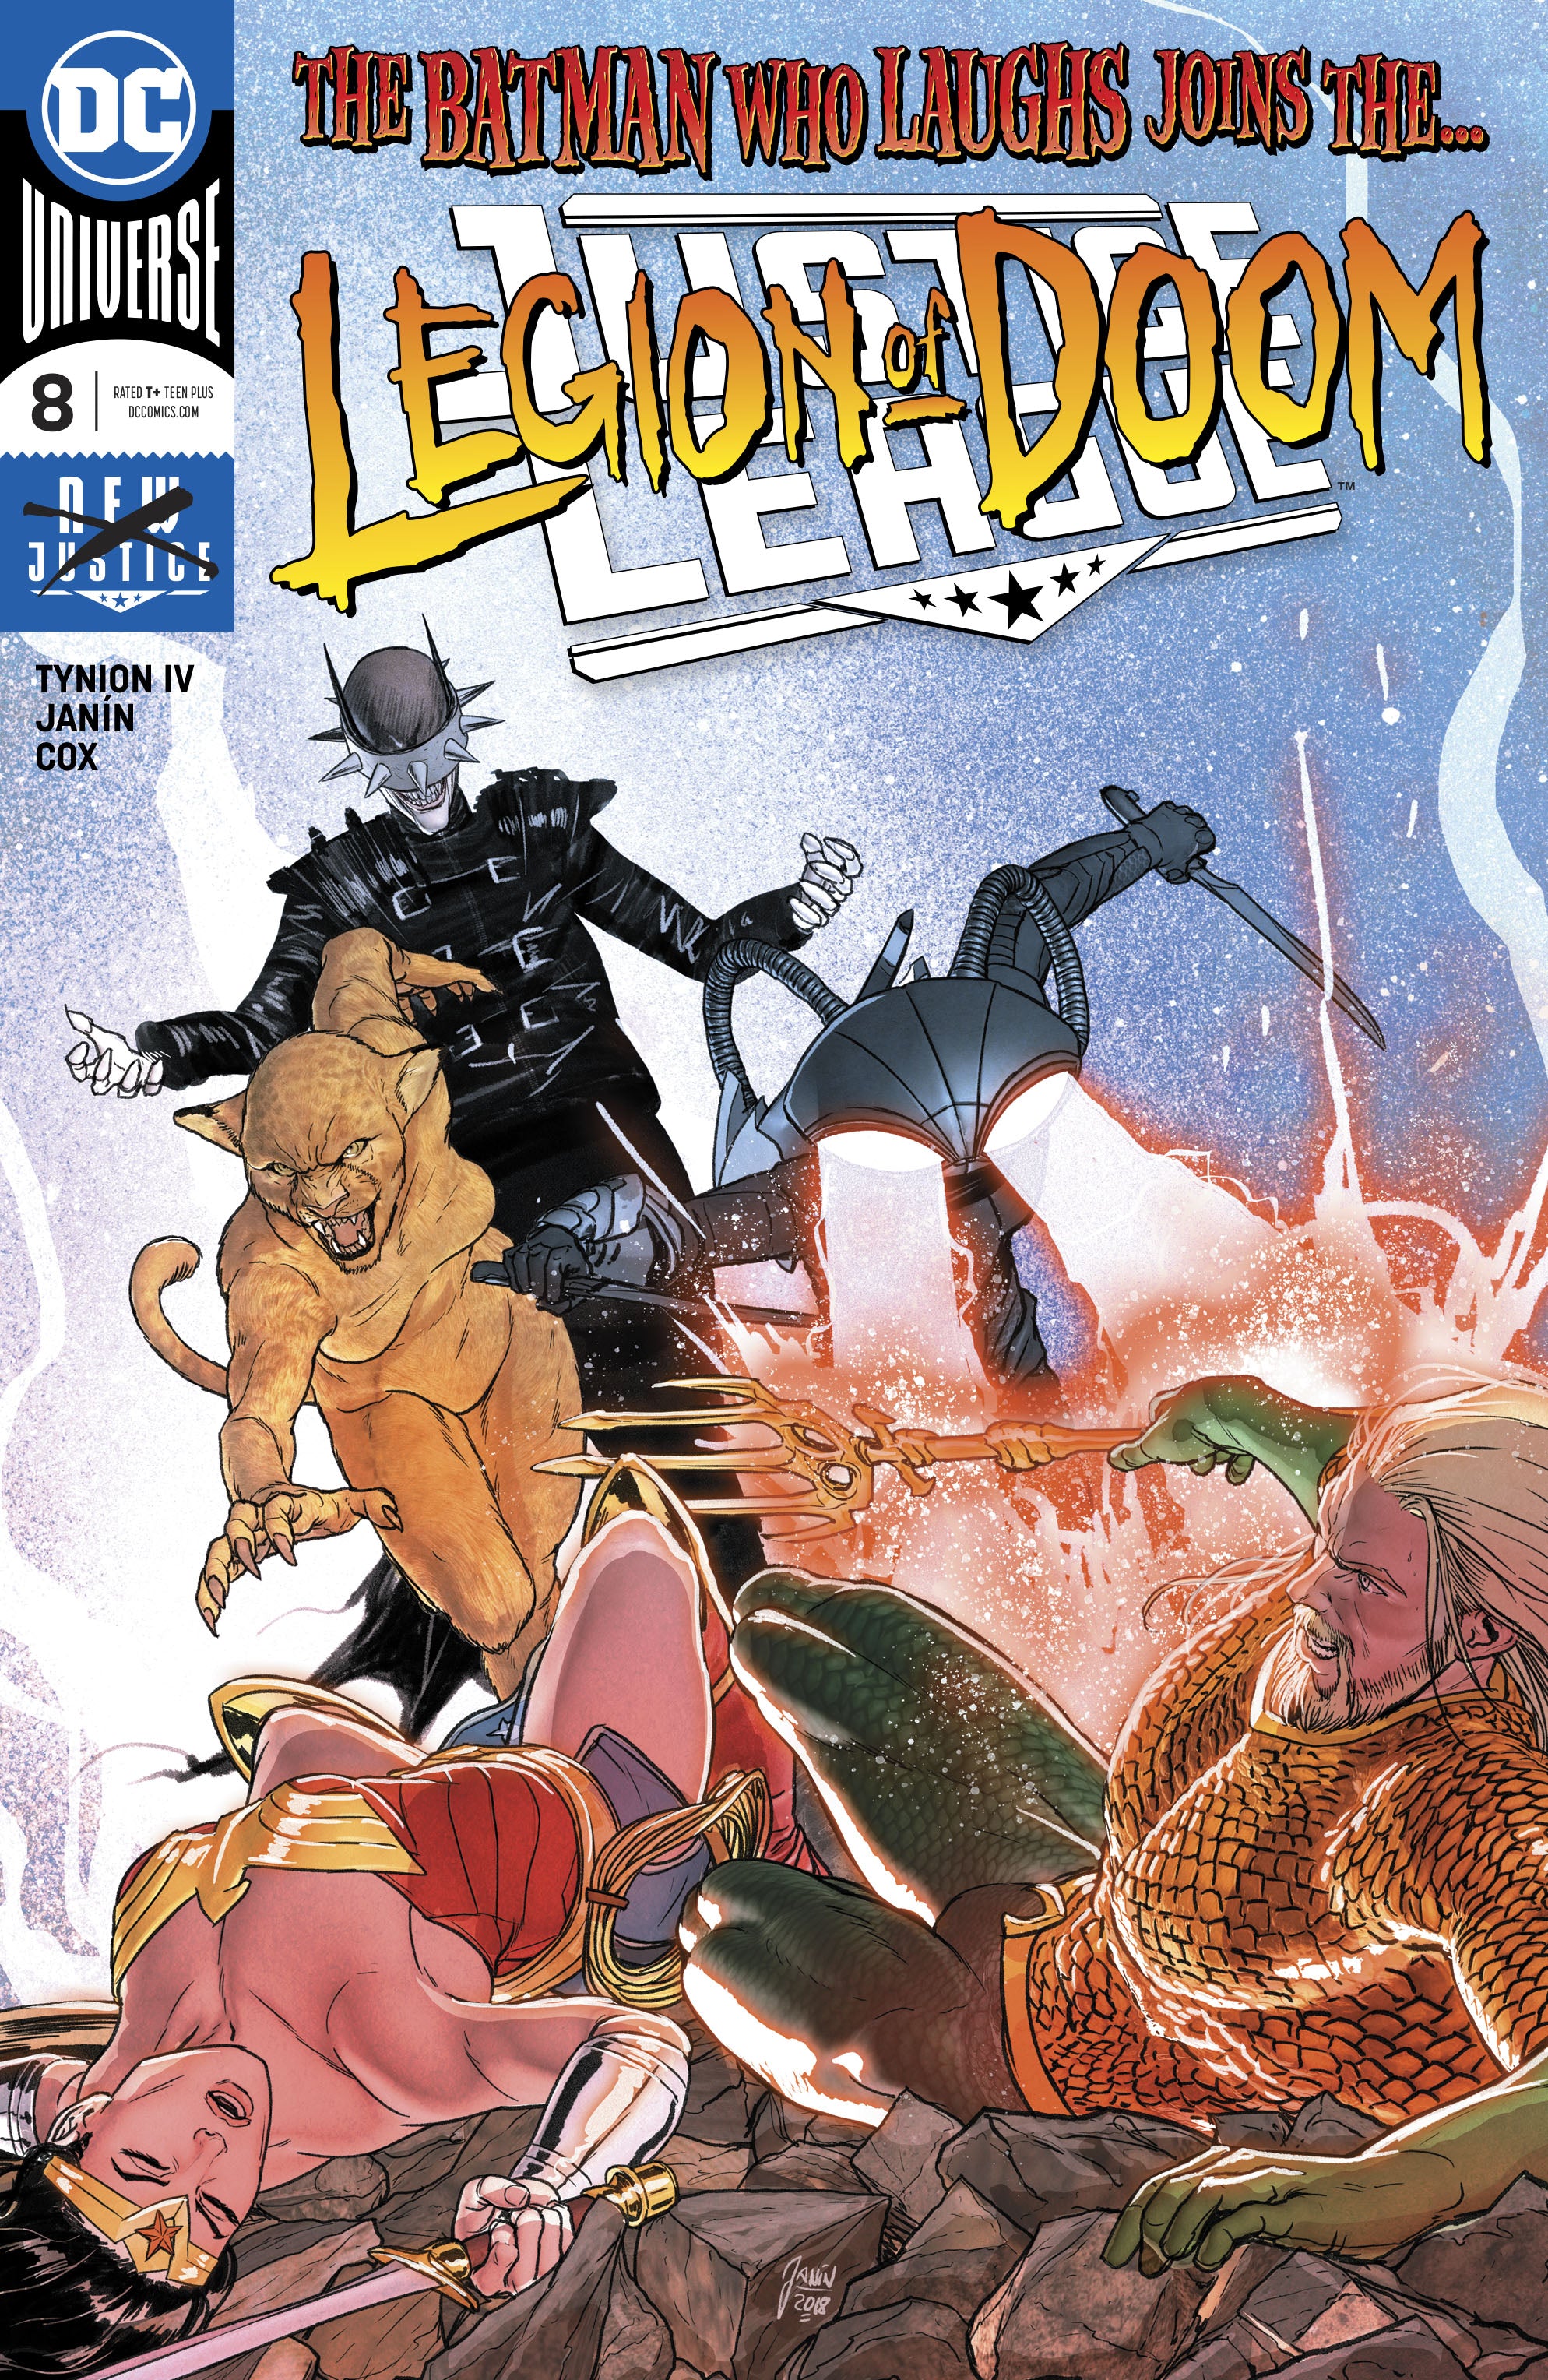 JUSTICE LEAGUE #8 | Game Master's Emporium (The New GME)